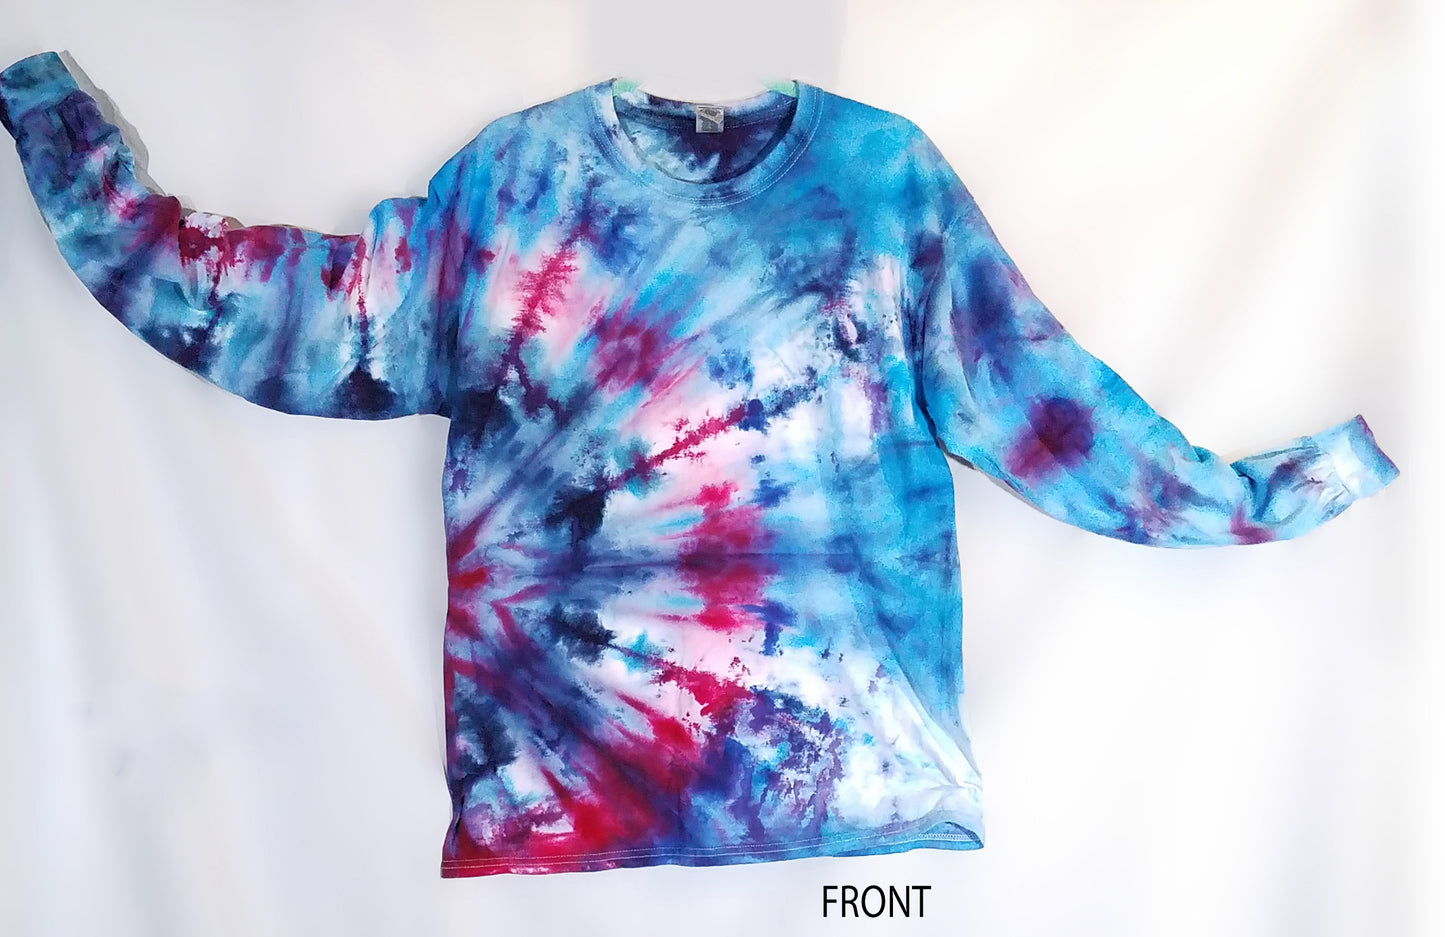 SOLD Large Long Sleeve Tie Dye Shirt Blues with a pop of red/pink